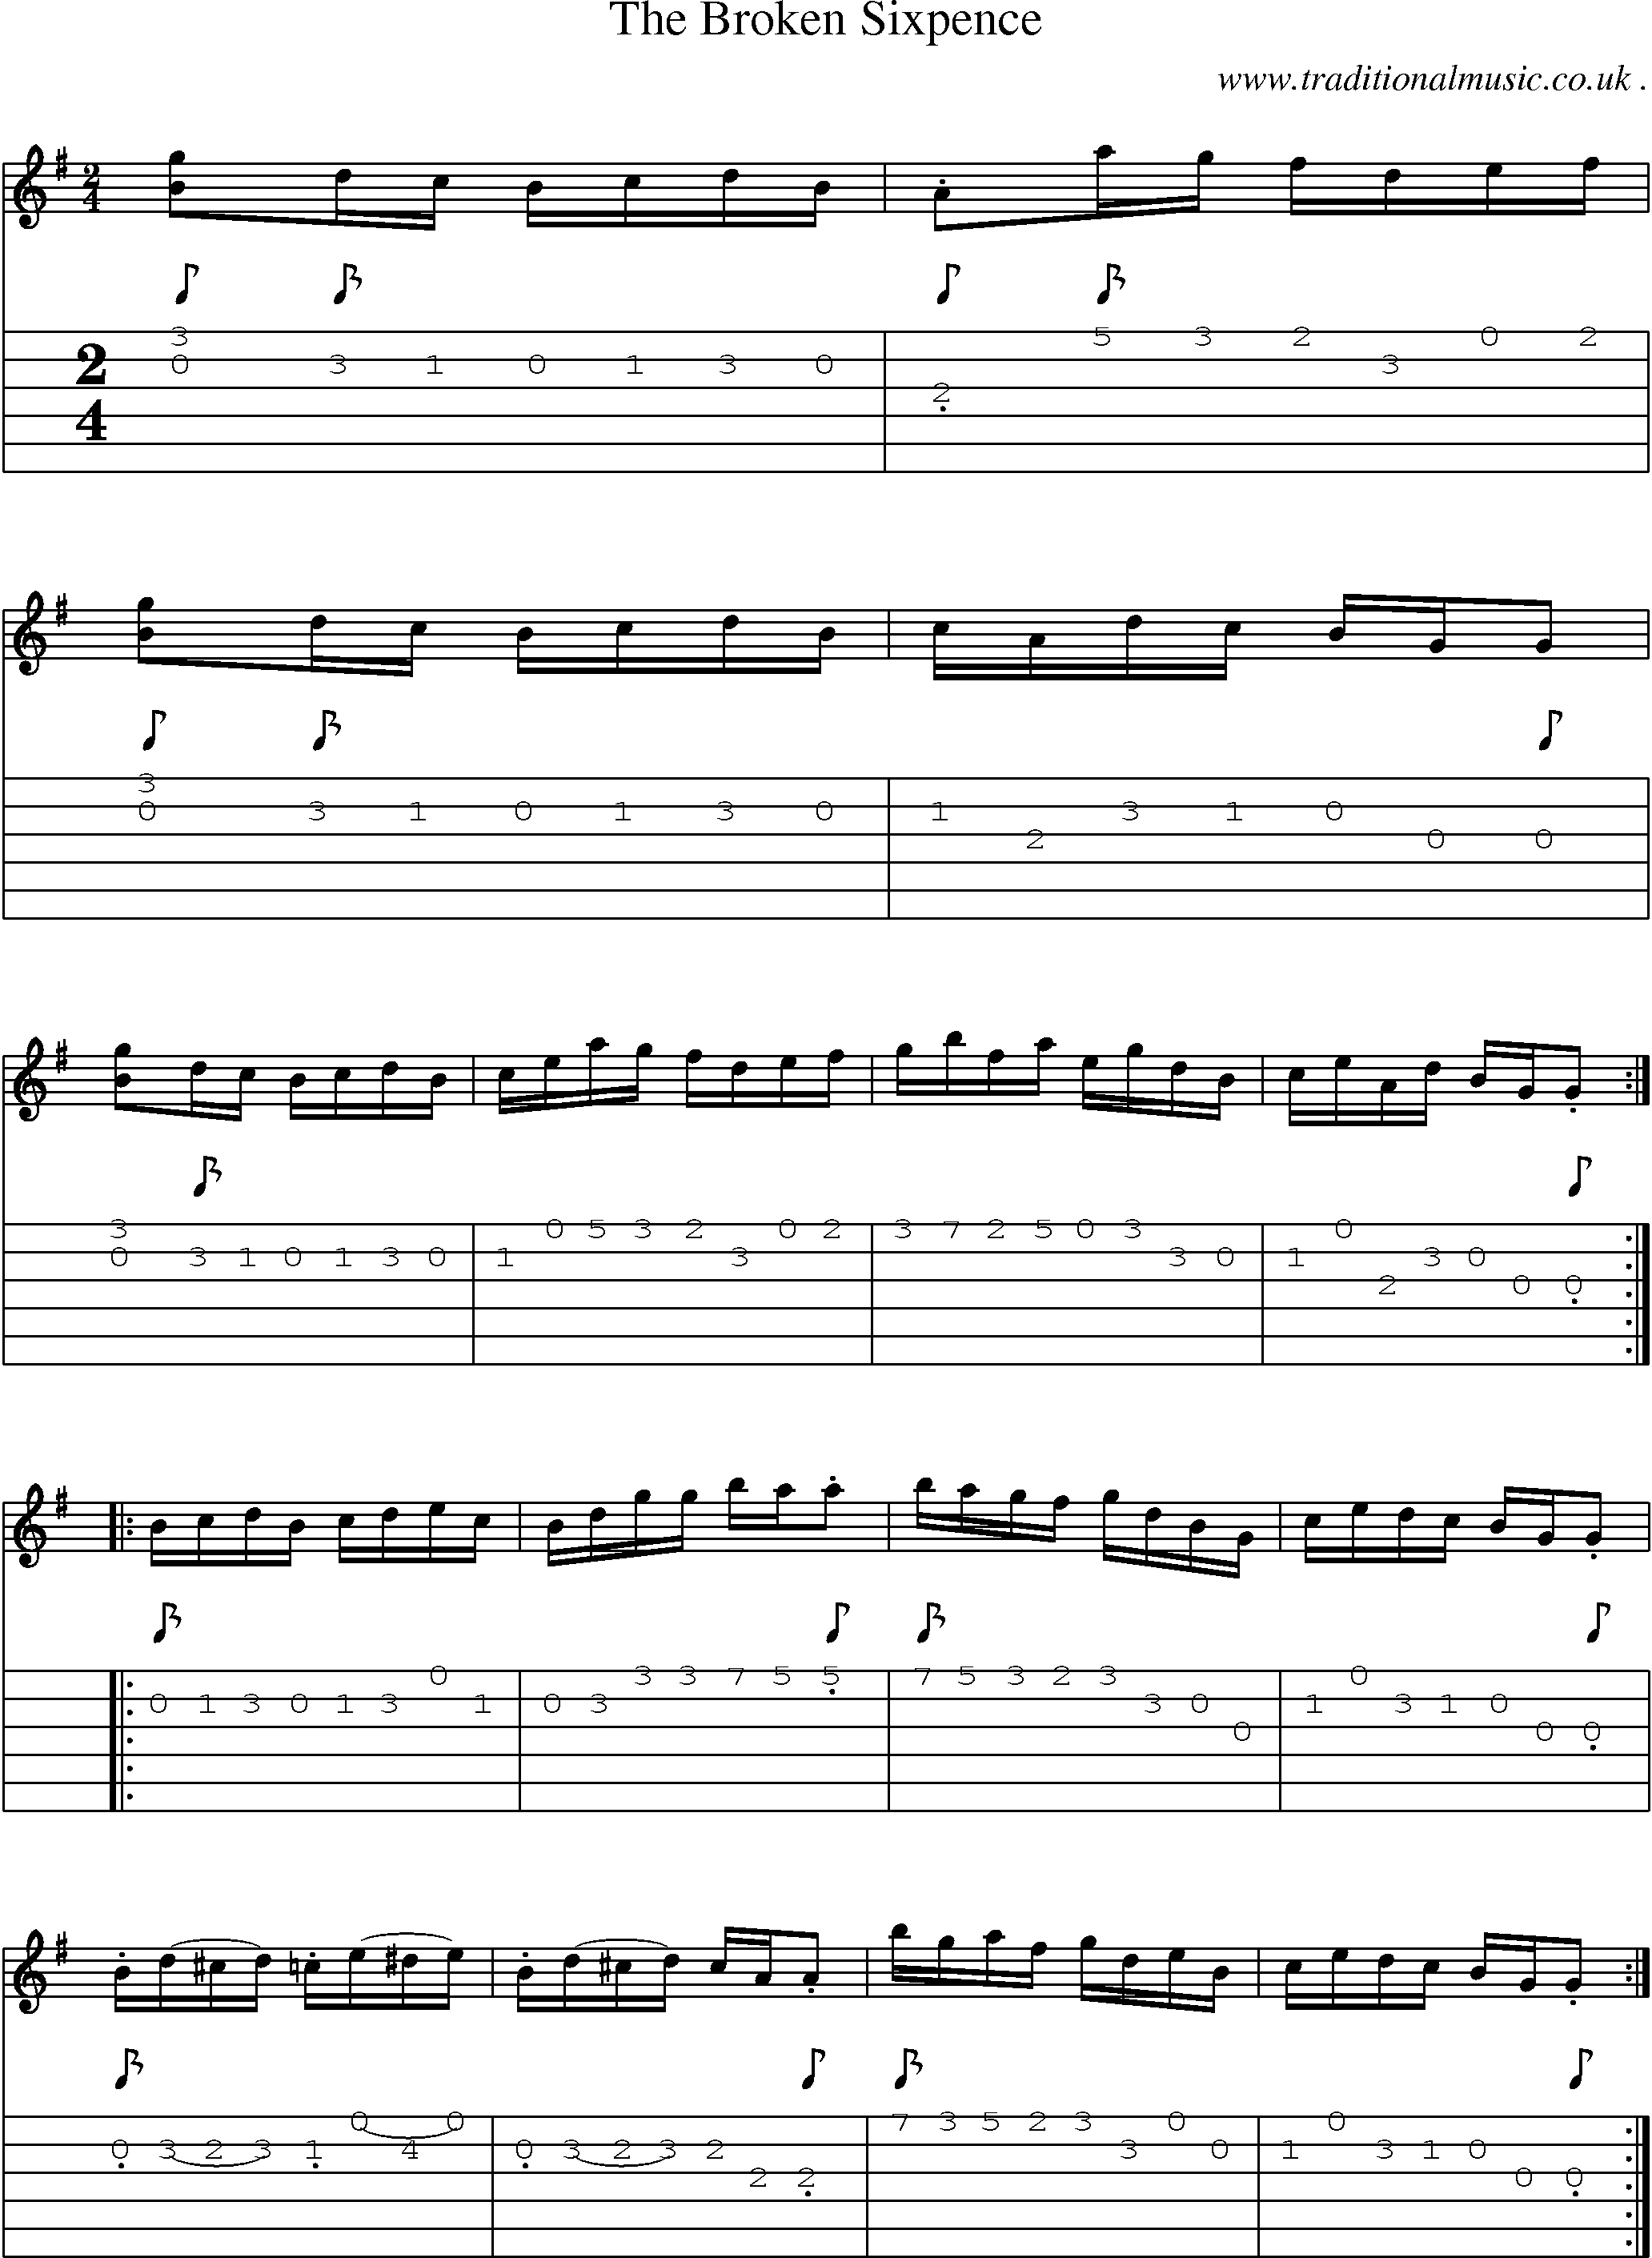 Sheet-Music and Guitar Tabs for The Broken Sixpence